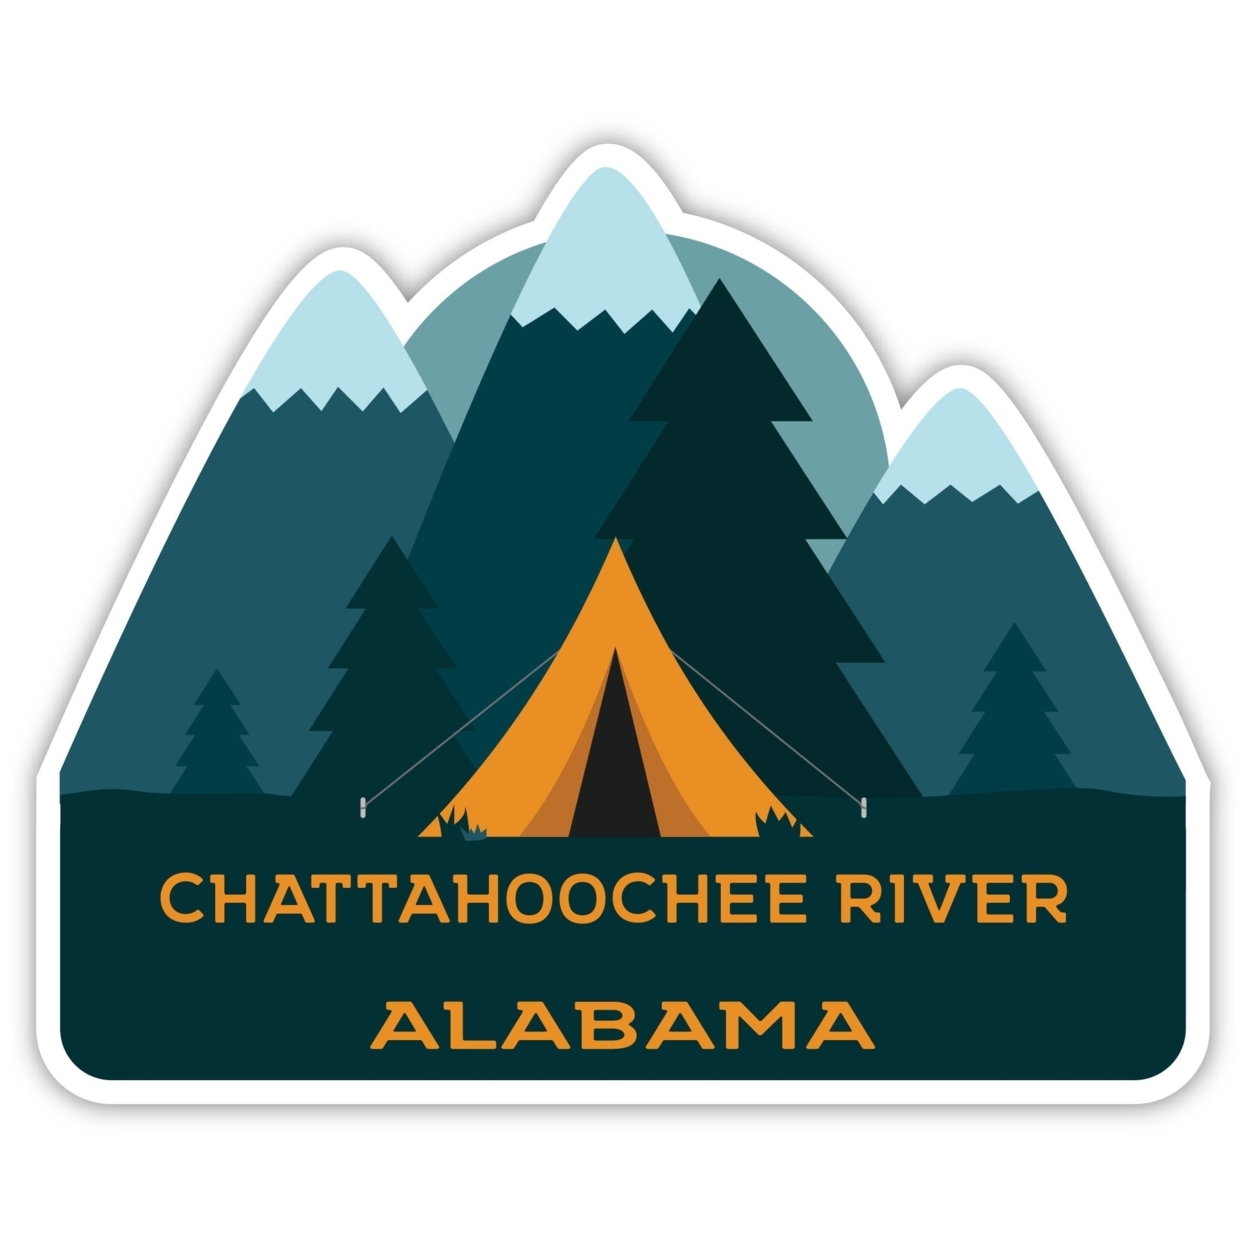 Chattahoochee River Alabama Souvenir Decorative Stickers (Choose Theme And Size) - 4-Pack, 12-Inch, Tent